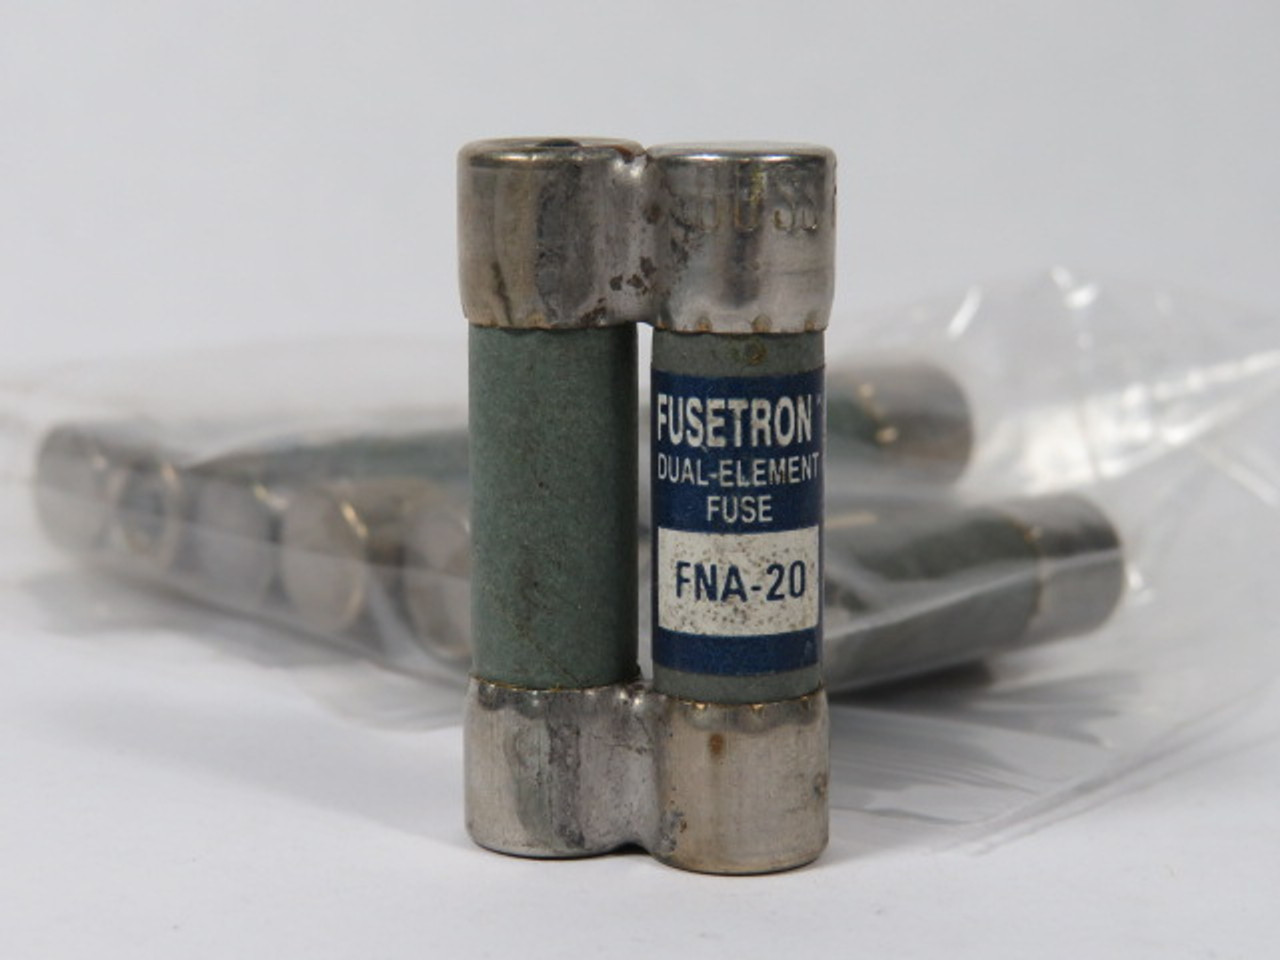 Fusetron FNA-20 Dual Element Fuse 20A 125V Lot of 5 USED